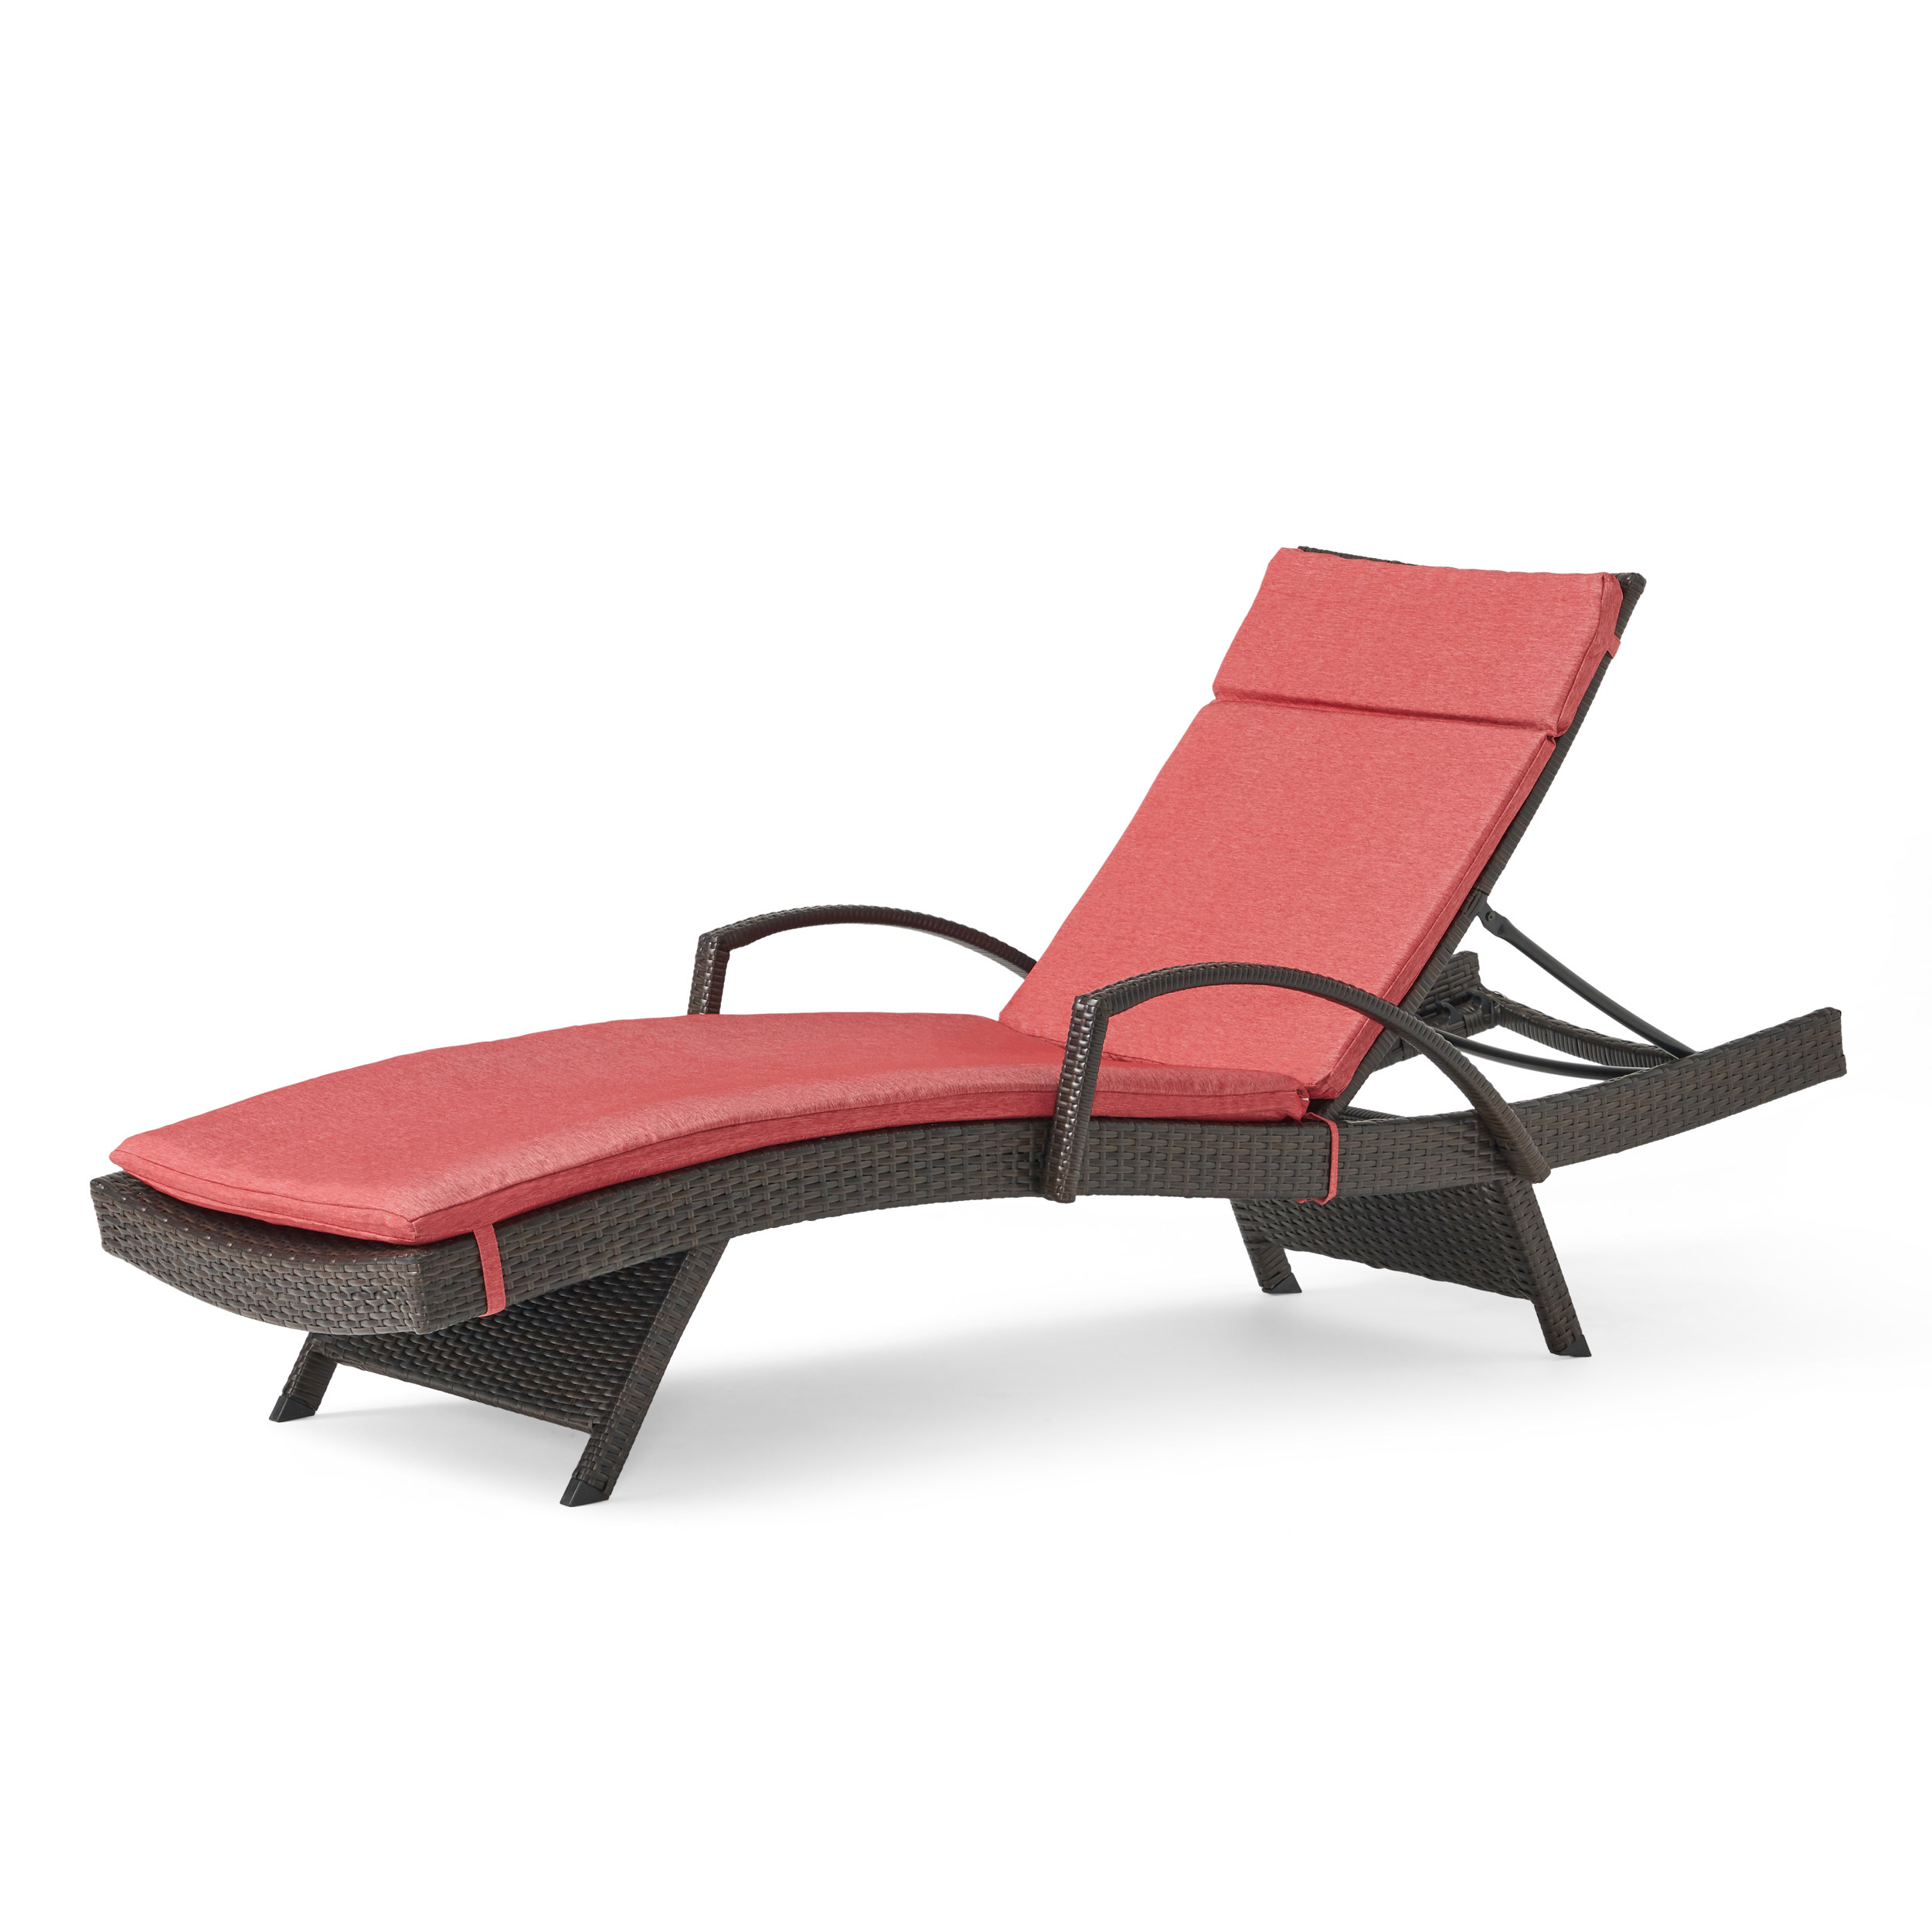 GDF Studio Olivia Outdoor Wicker Adjustable Chaise Lounge with Cushion, Multibrown and Red - image 1 of 8